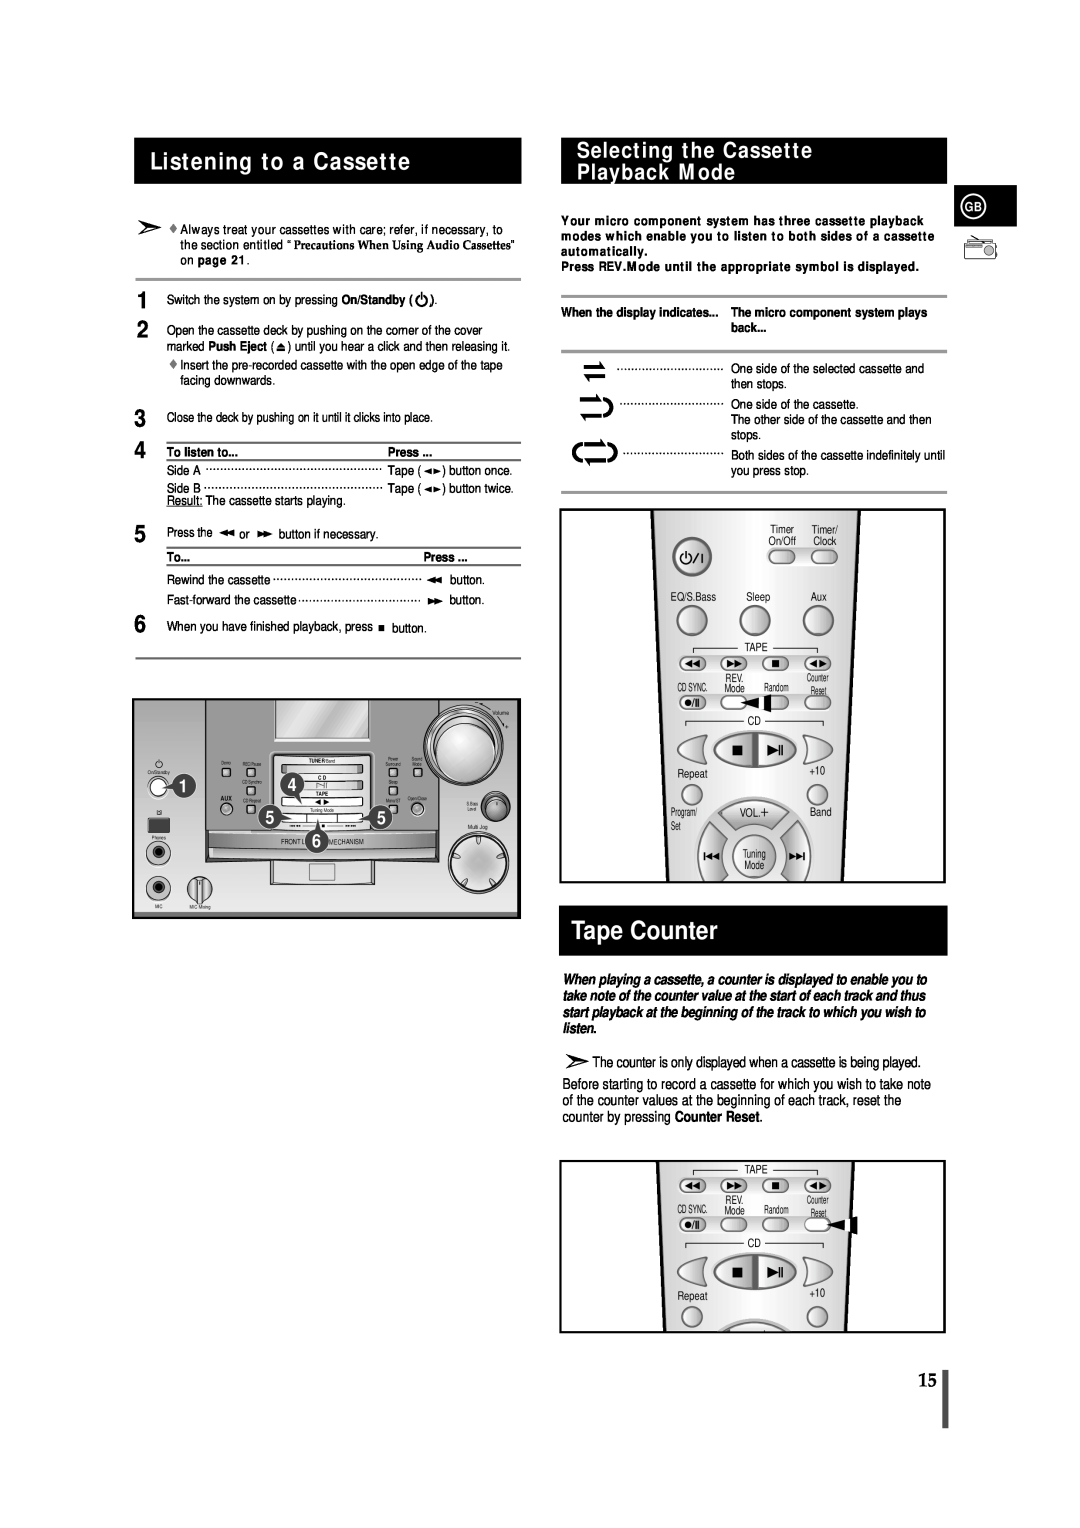 Samsung AH68-01018B, MM-B9 instruction manual Listening to a Cassette, Selecting the Cassette Playback Mode, Tape Counter 